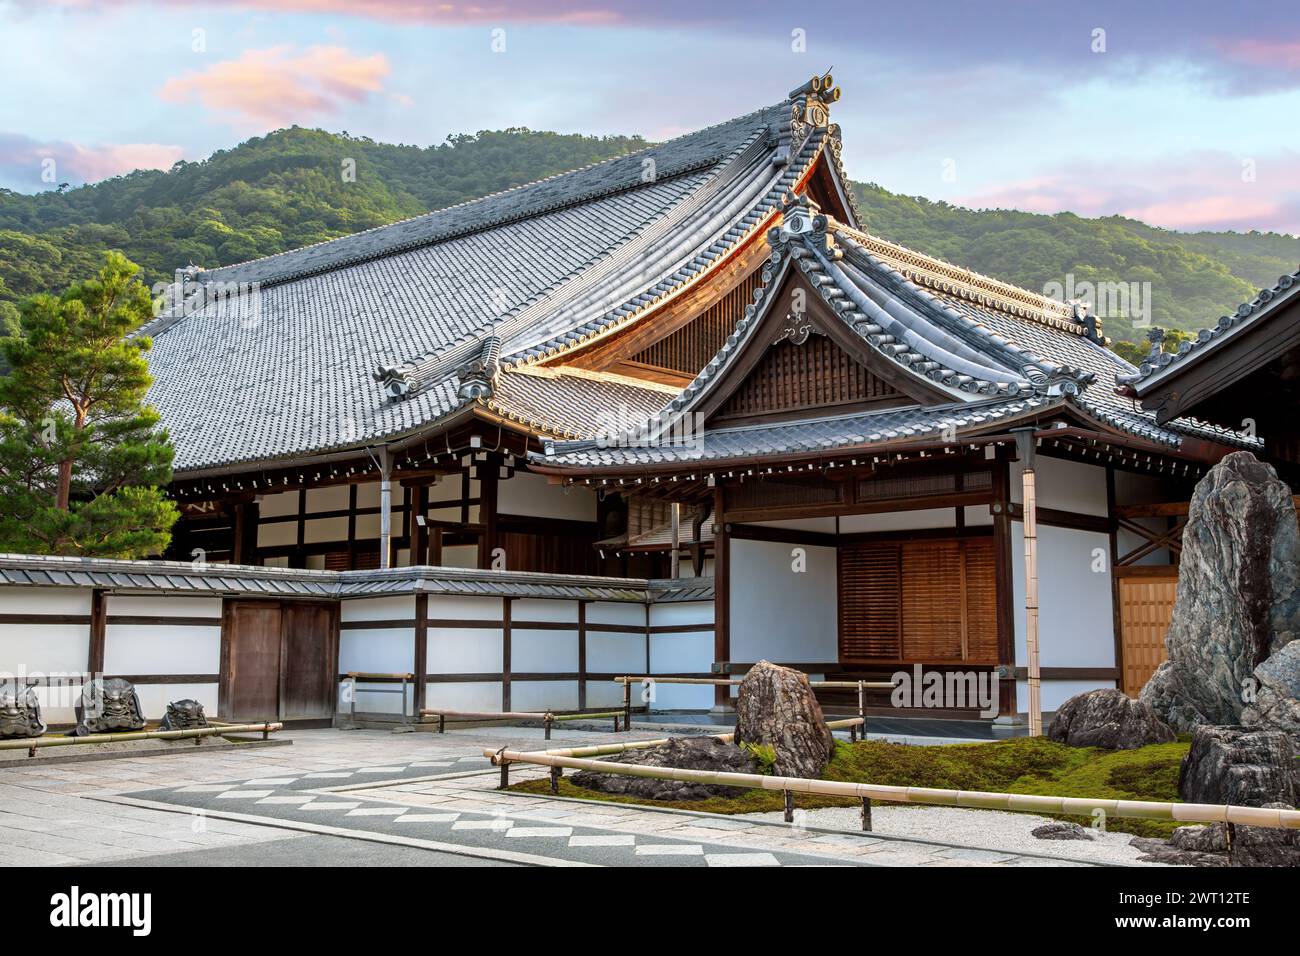 Exterior of the Arashiyama temple in Kyoto, Japan. Image taken from a public street. Stock Photo